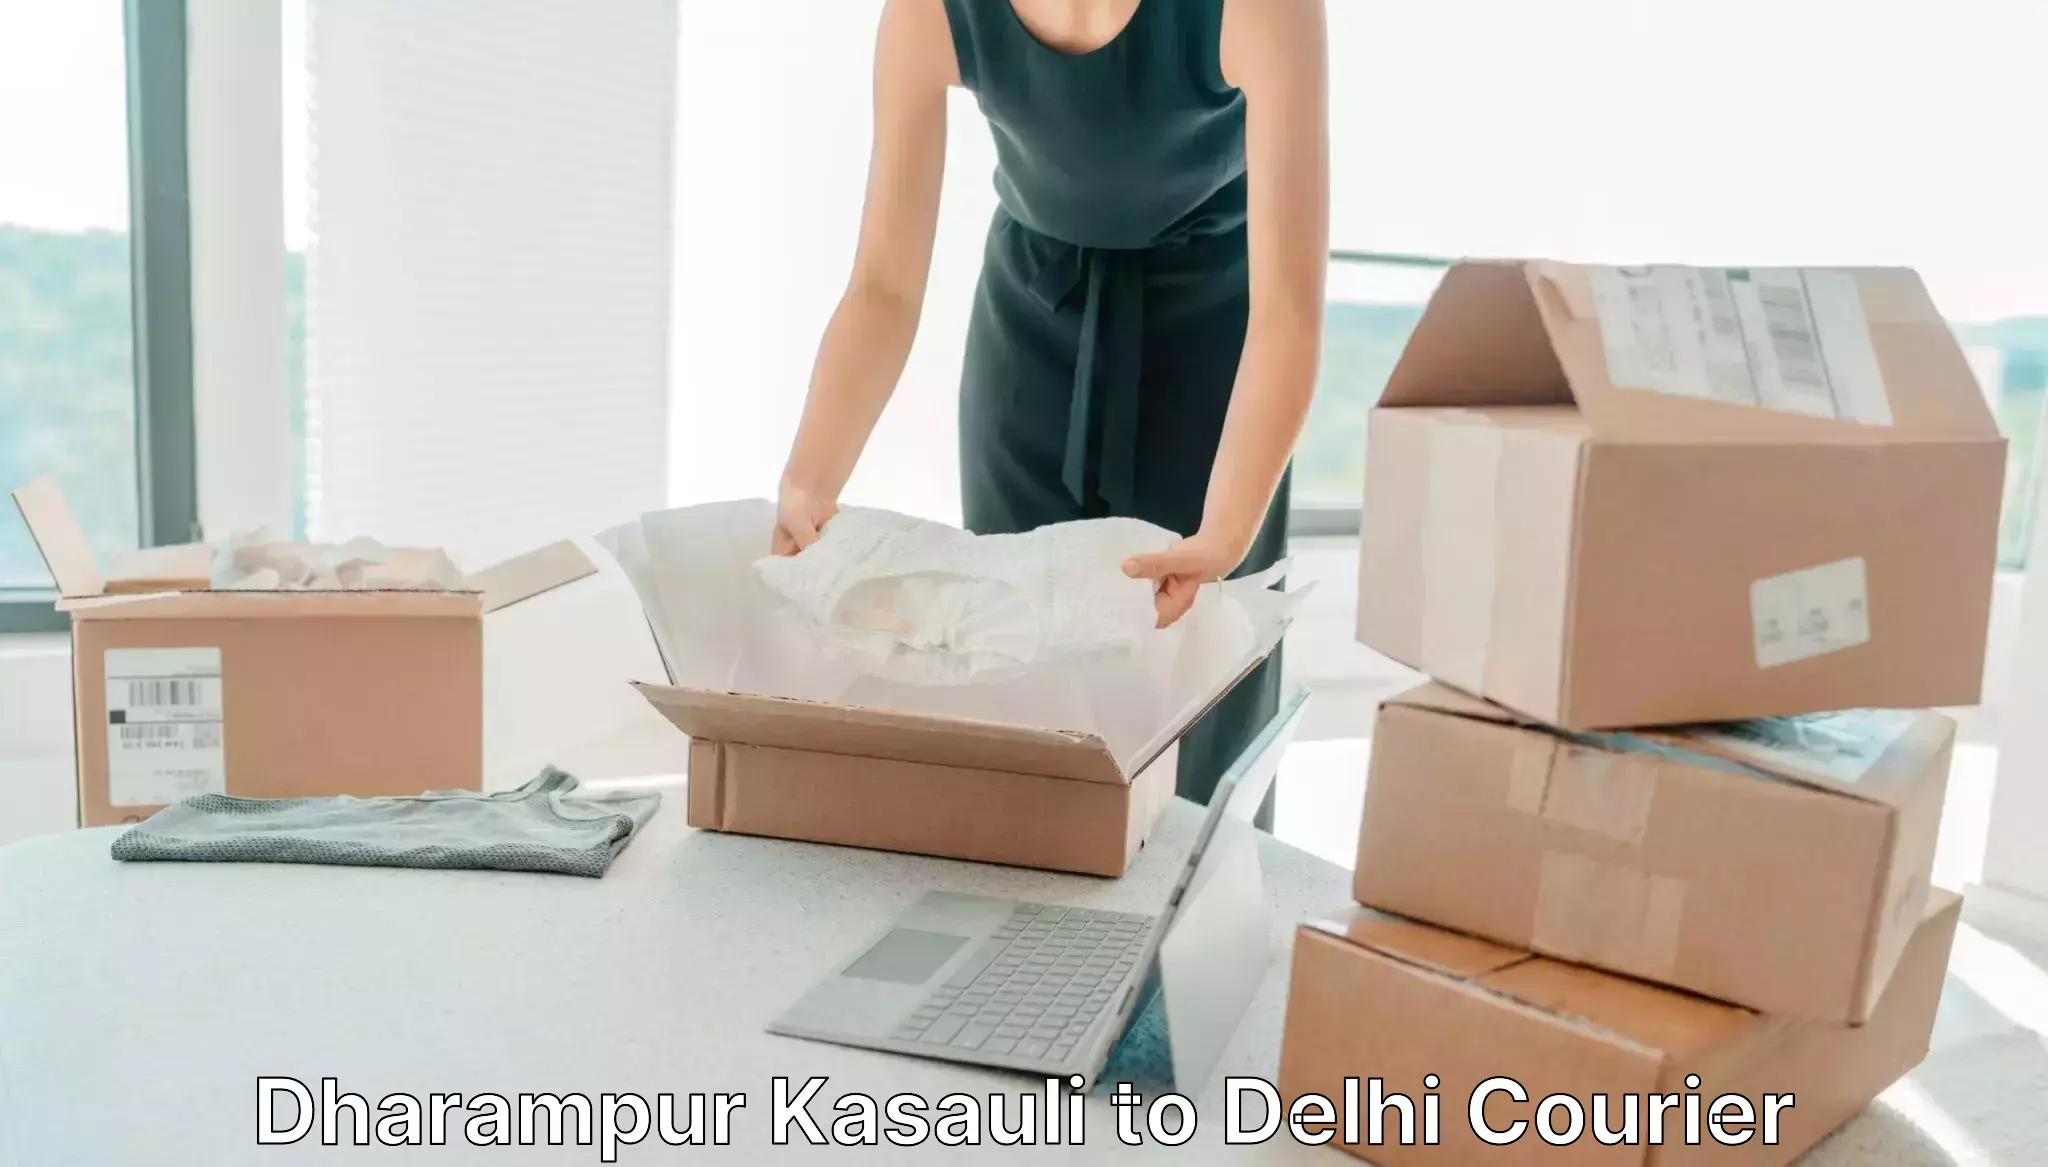 Courier service comparison Dharampur Kasauli to NCR